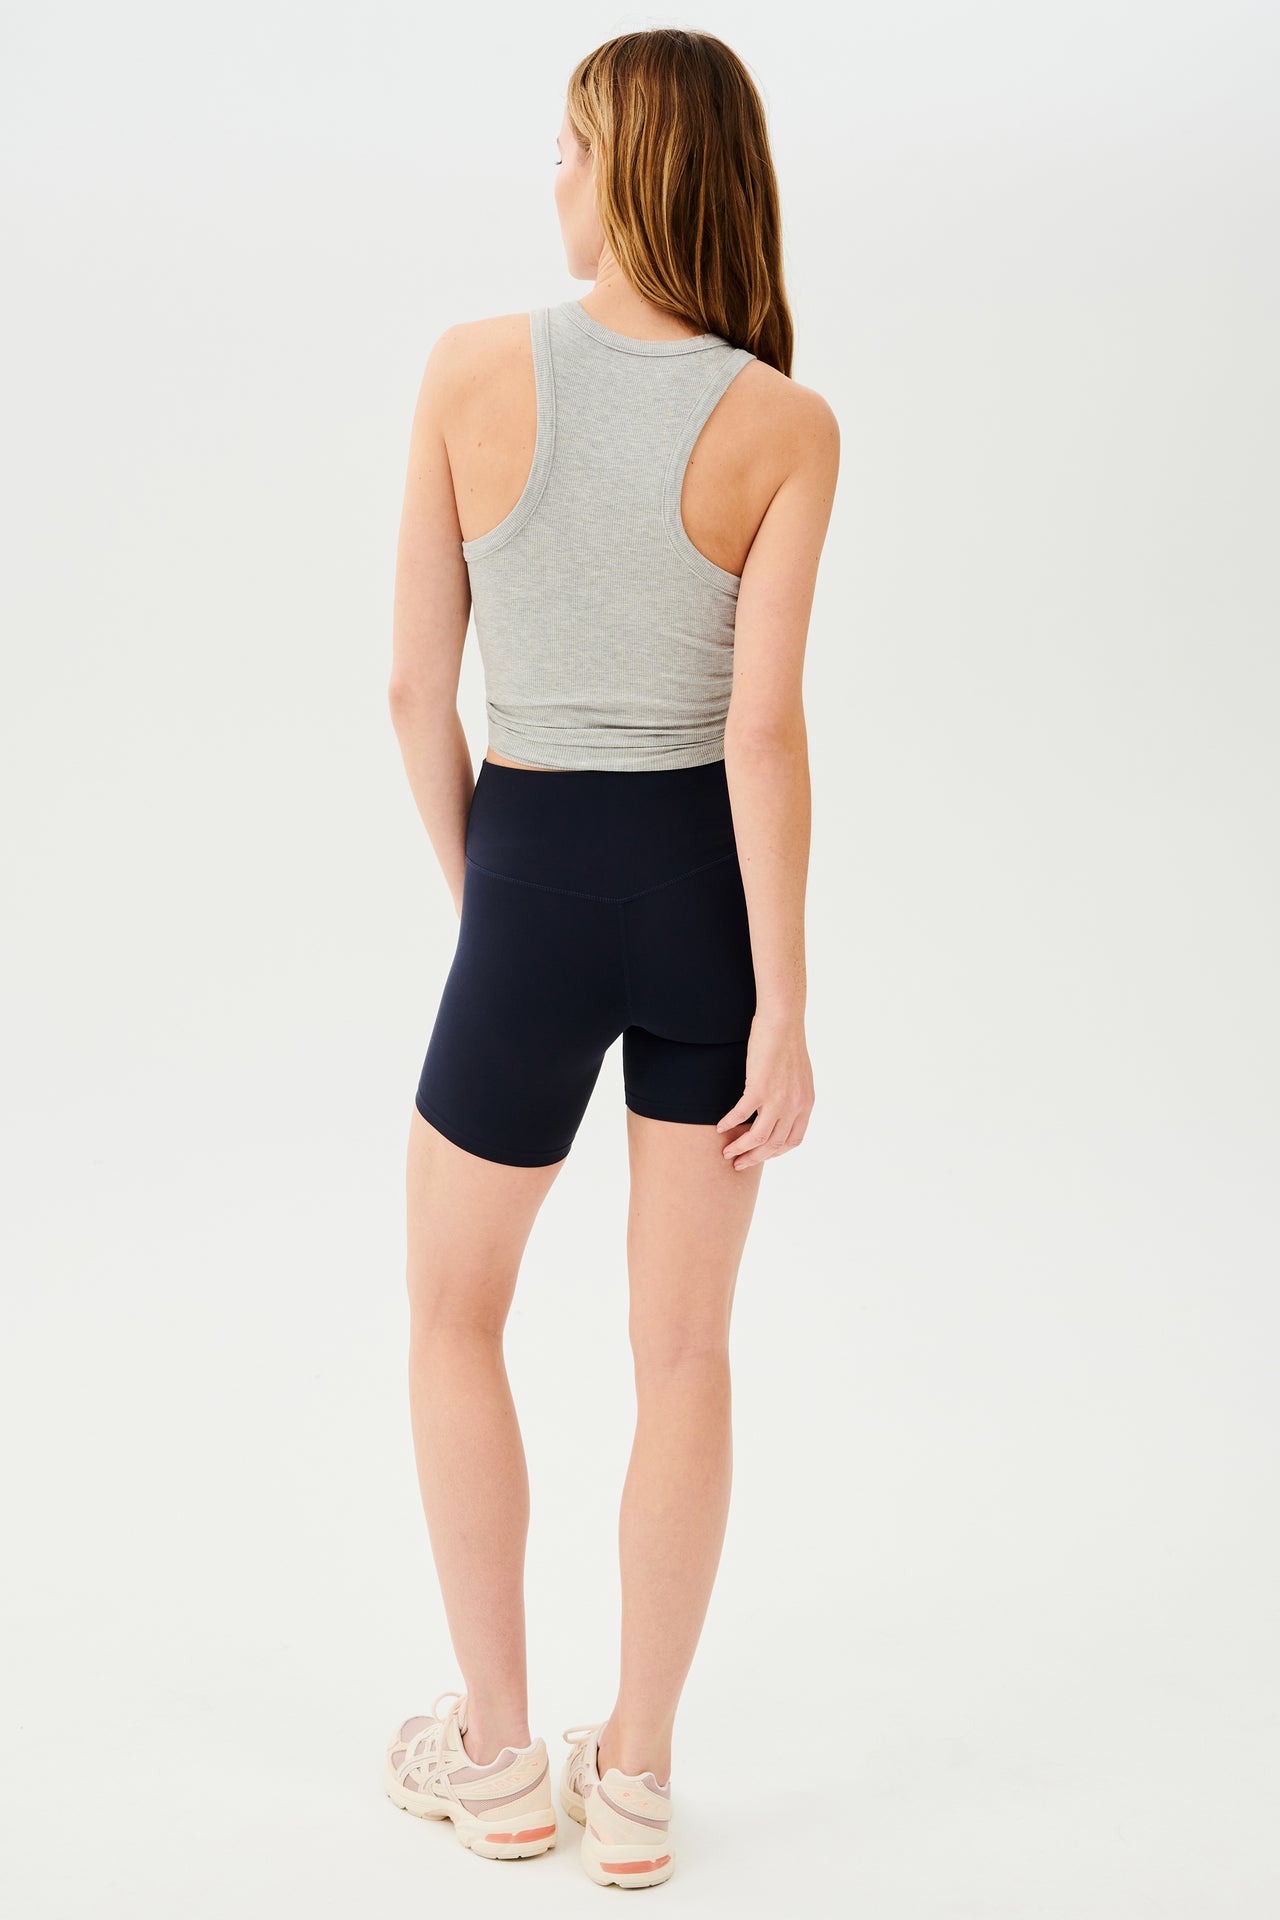 The back view of a woman wearing a SPLITS59 Kiki Rib Tank Full Length in Heather Grey and black shorts during her yoga session.